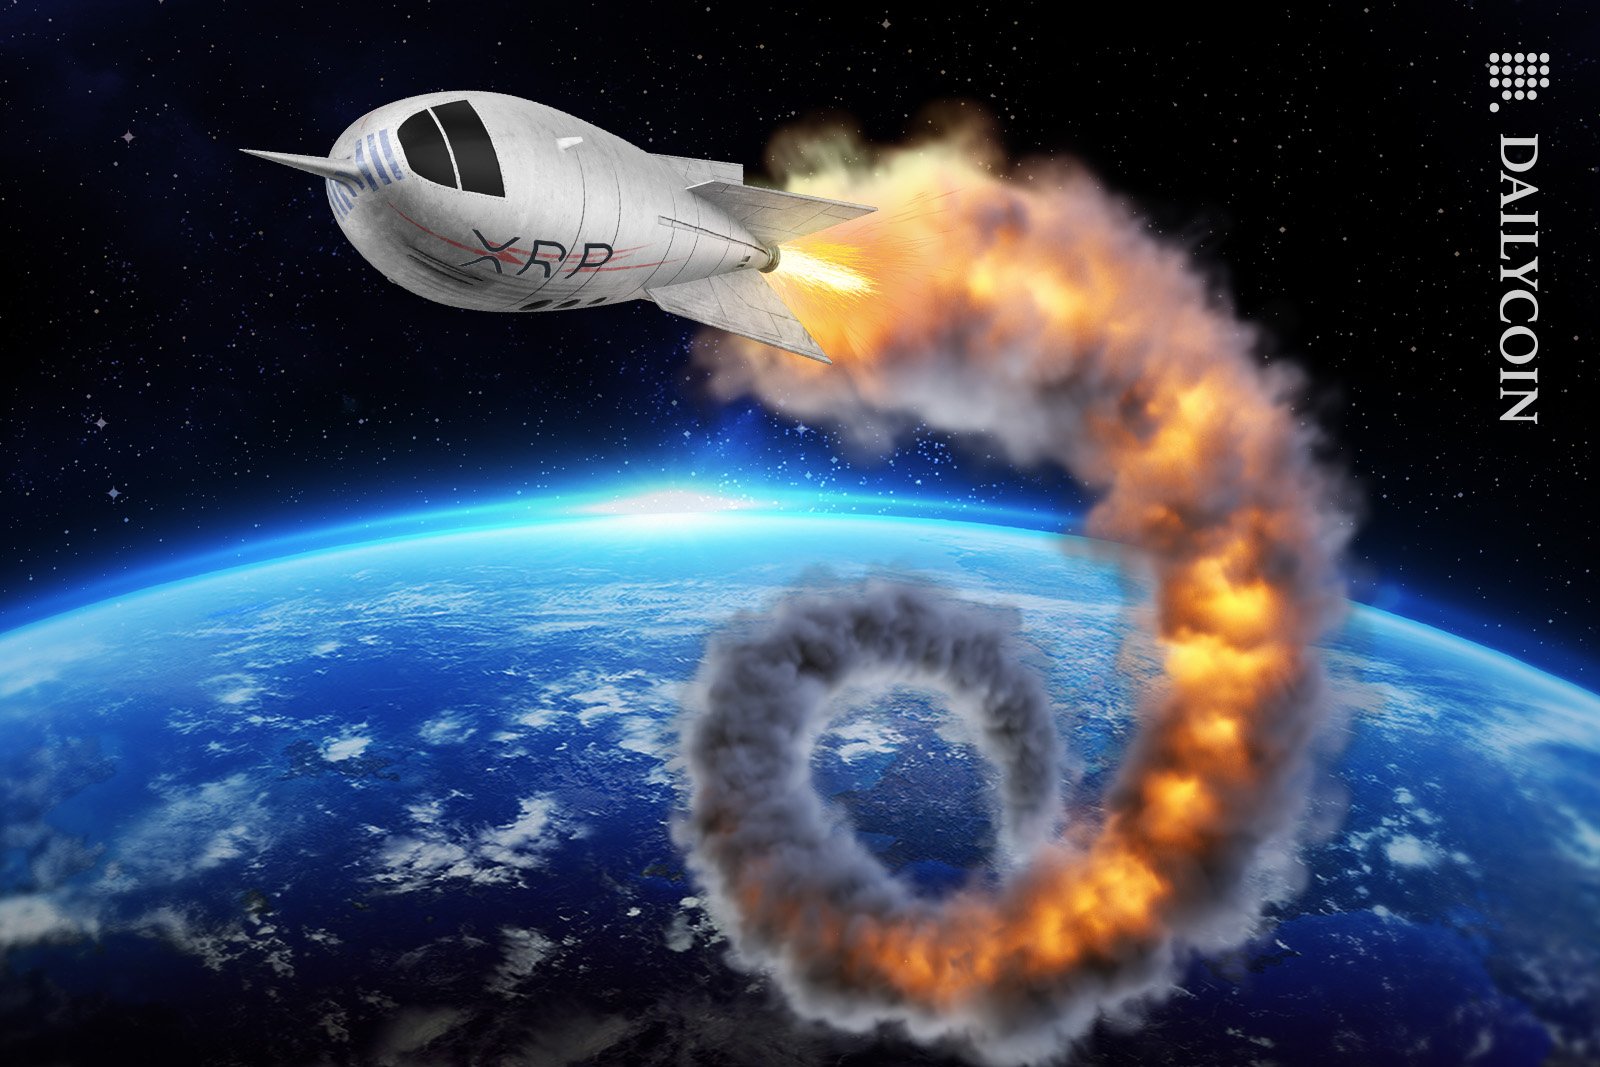 XRP rocket flying in space, leaving a long trail of flames and smoke.